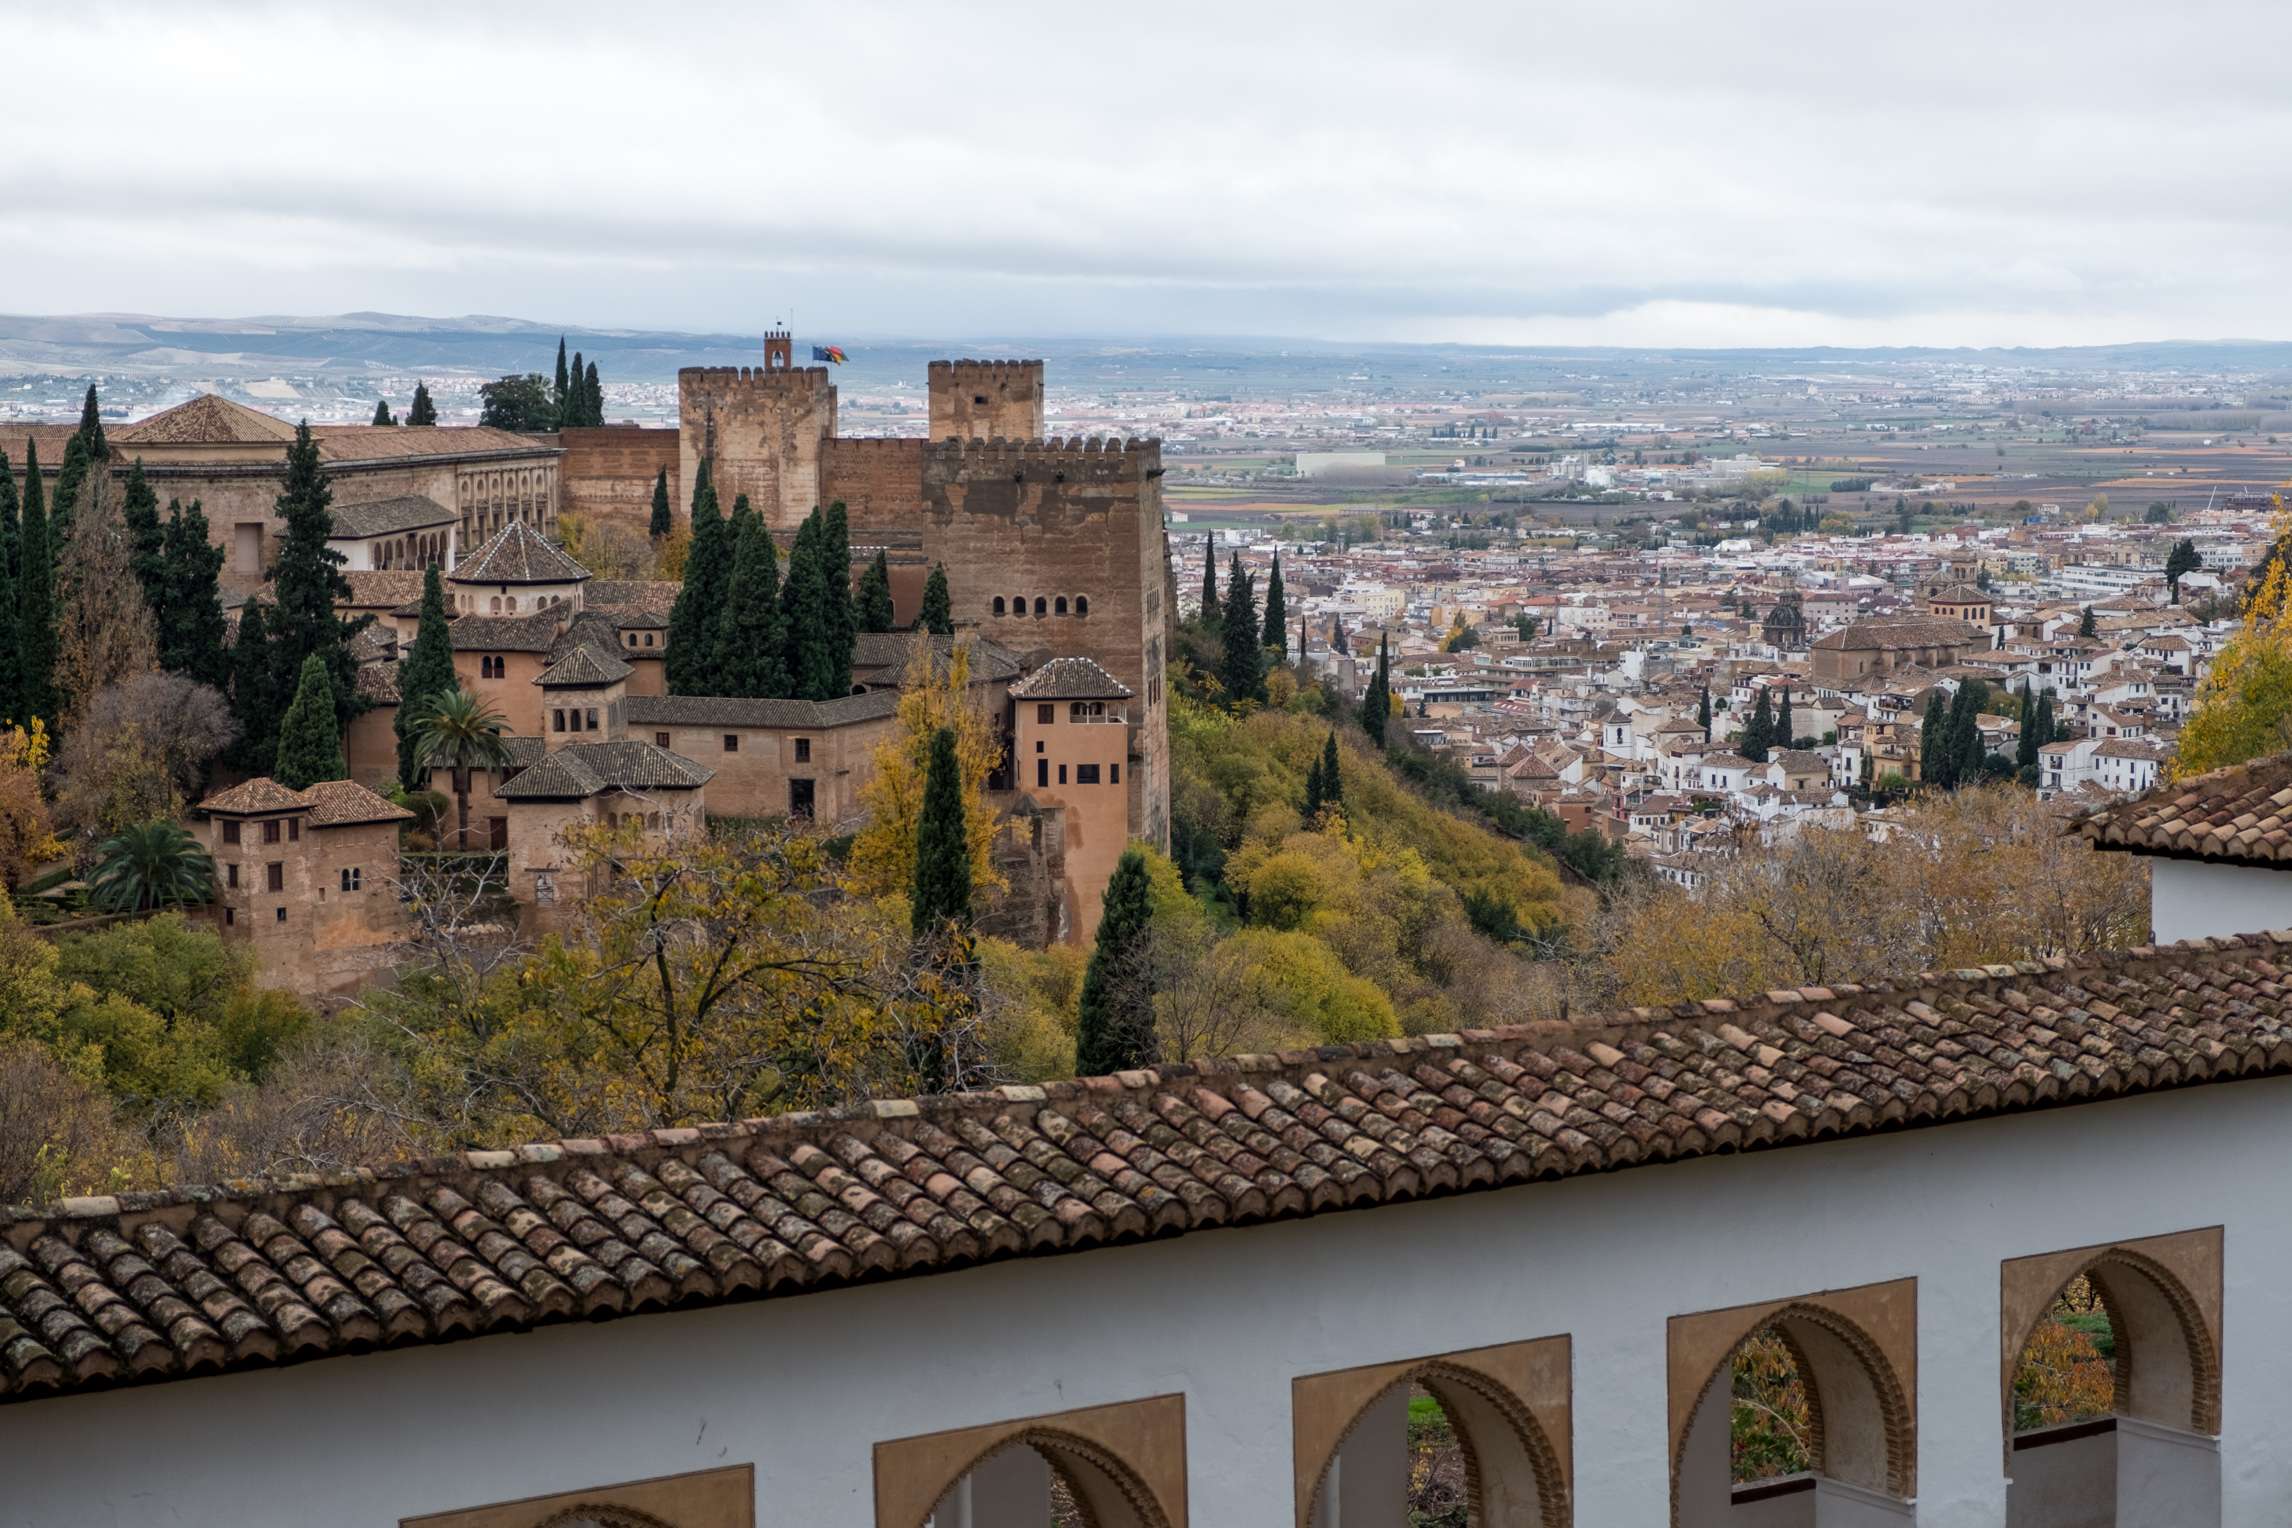 Nasrid Palace and Granada from the Generalife Palace, The Alhambra